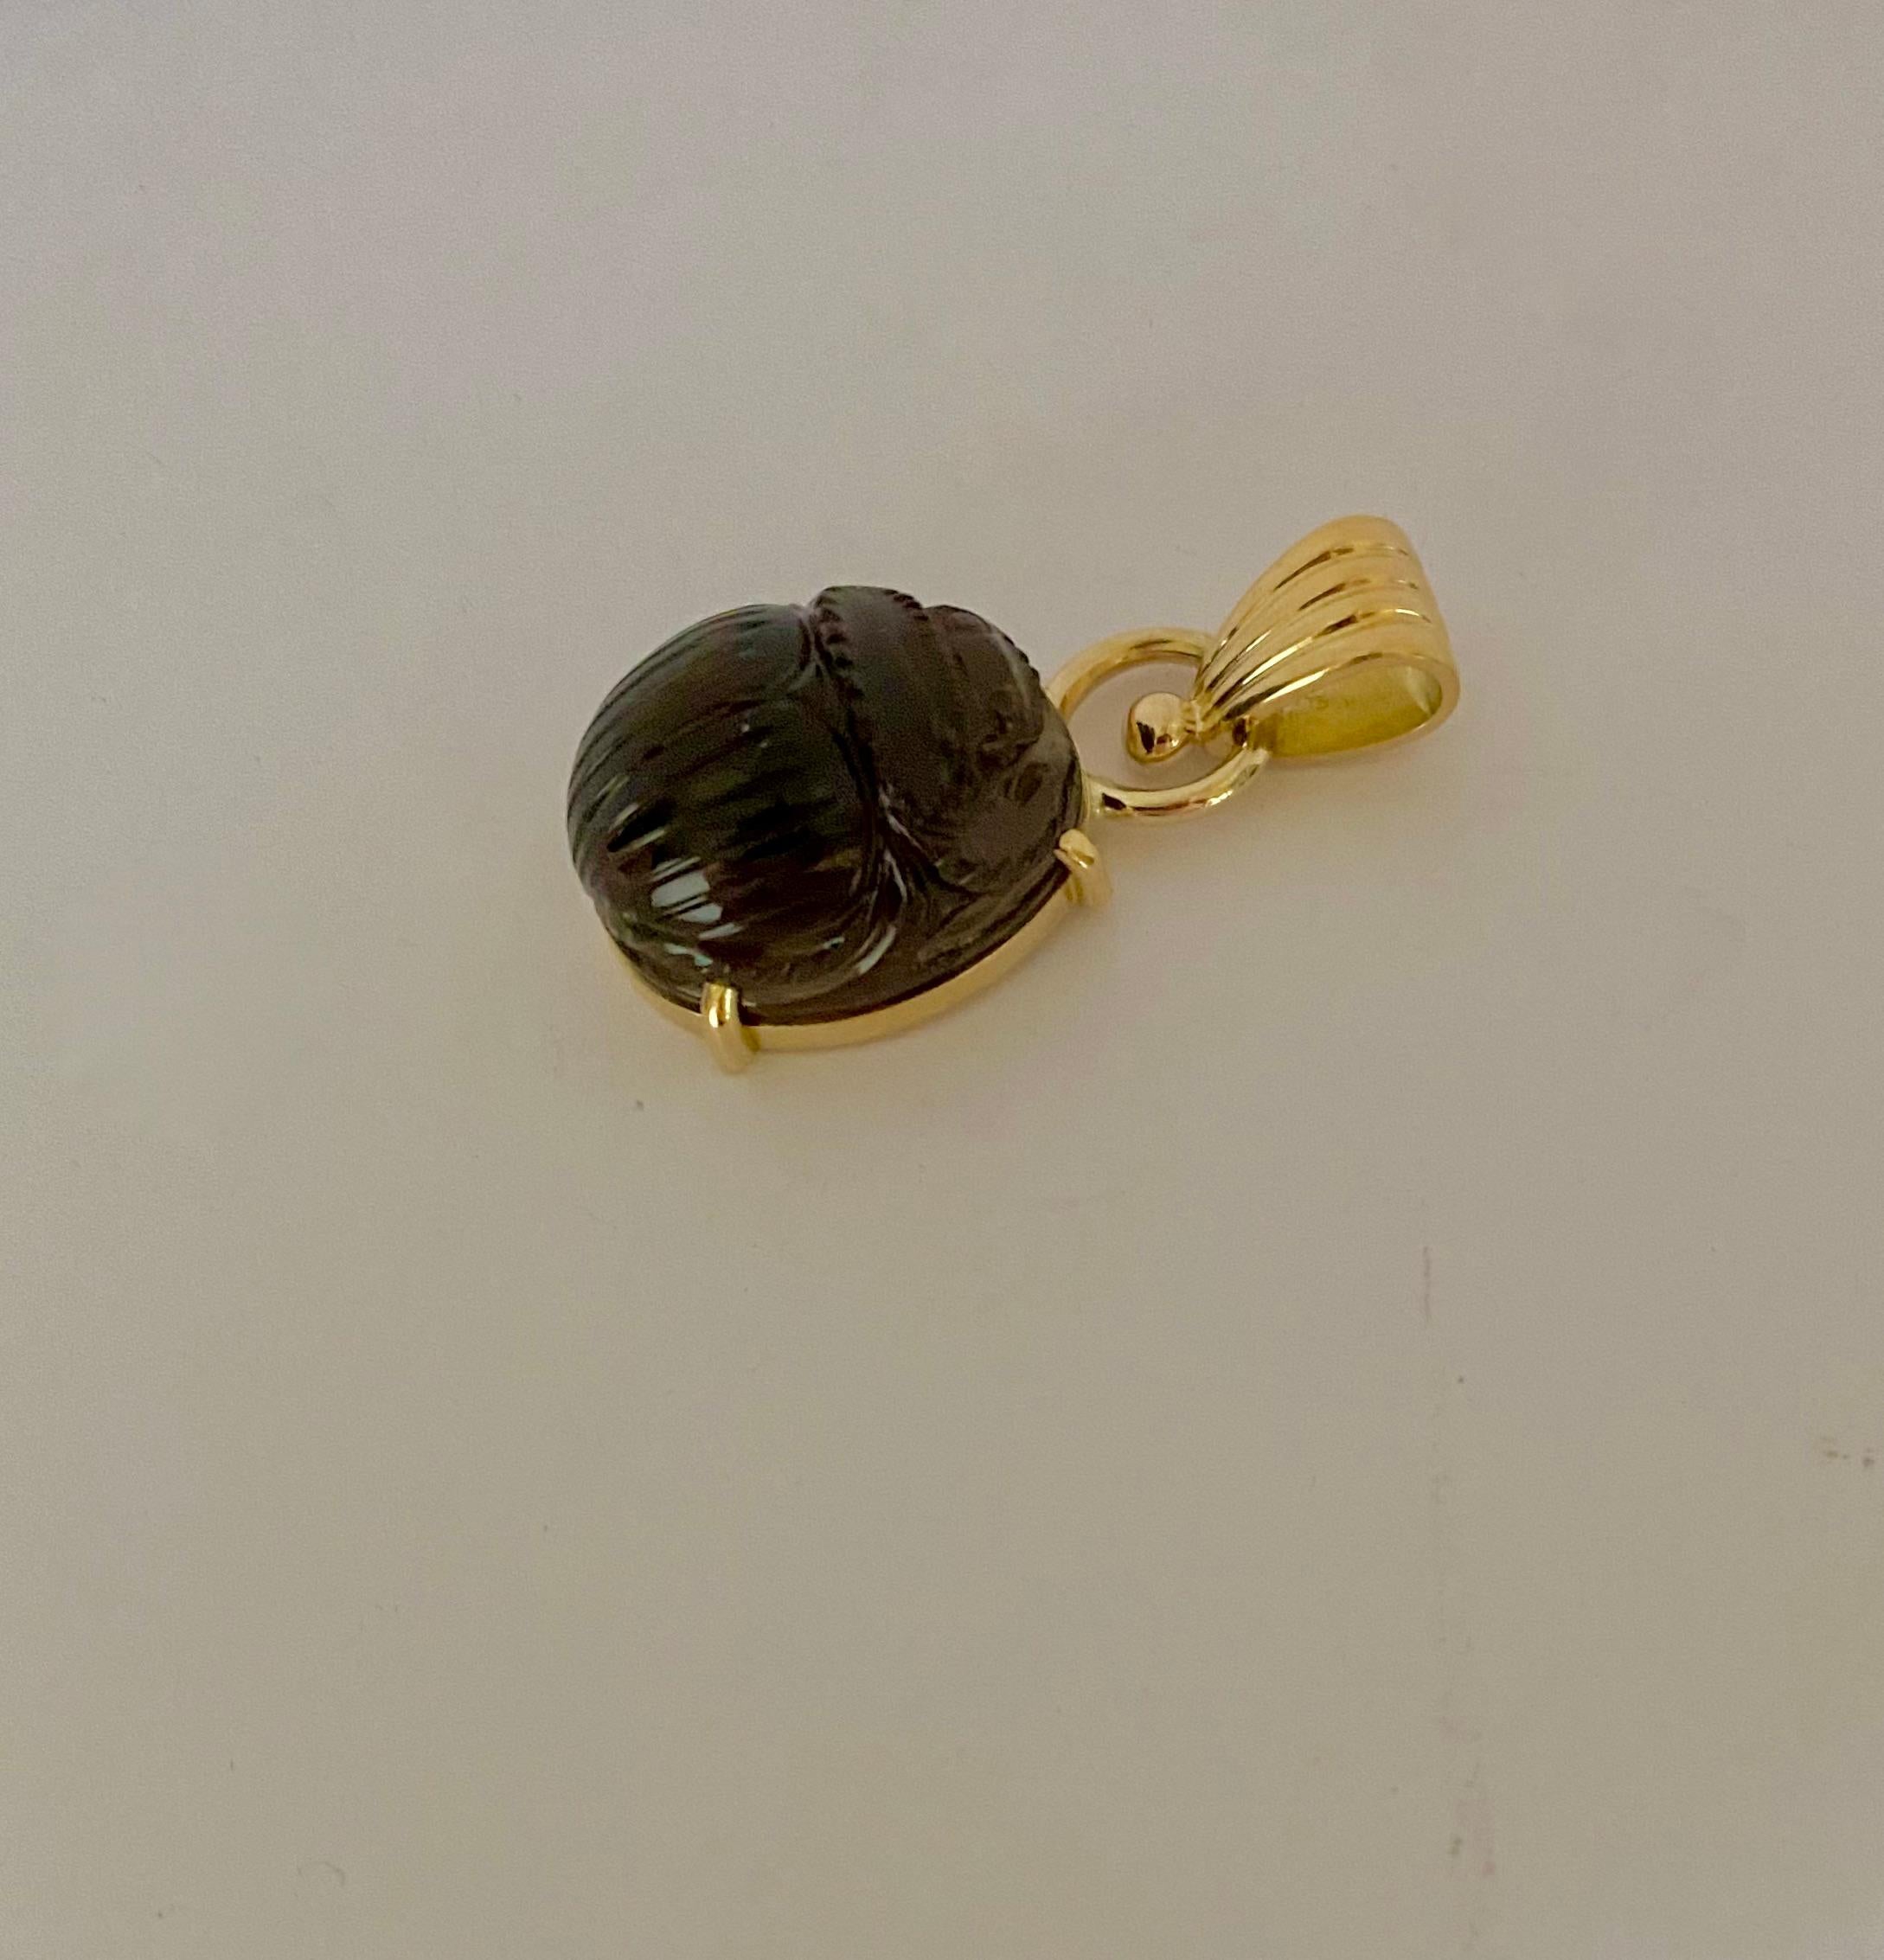 Set as a pendant is this carved smokey quartz scarab.  The richly colored quartz is exceptionally well carved.  The one-of-a-kind, modern scarab is set within an 18k gold pendant.  The bail is large and will   accommodate a variety of chains.  (The